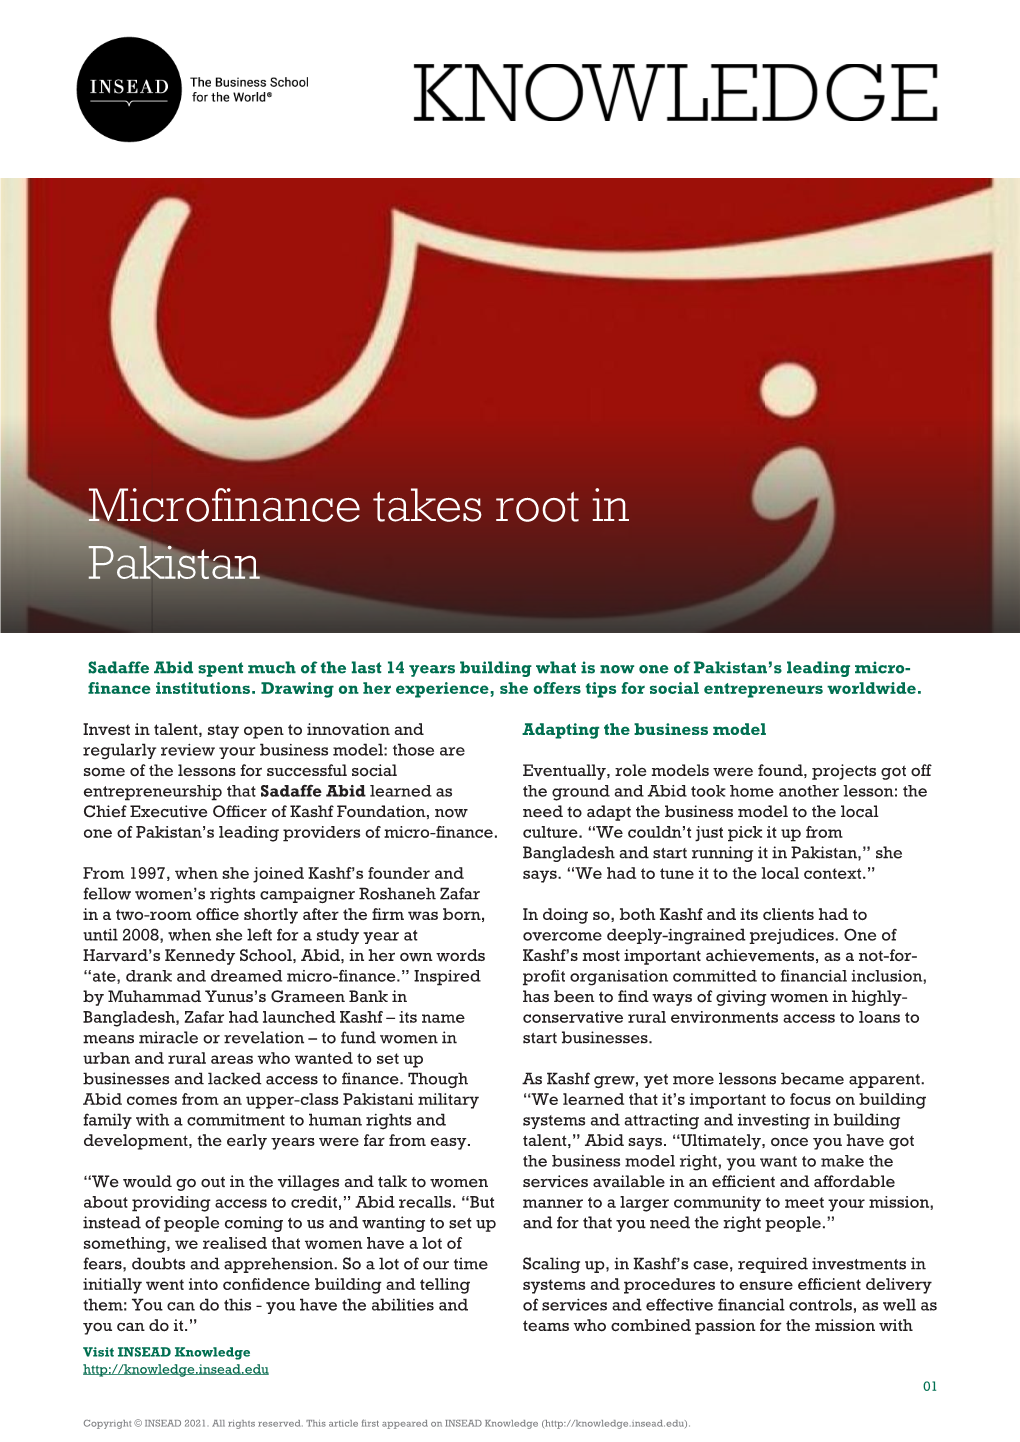 Microfinance Takes Root in Pakistan